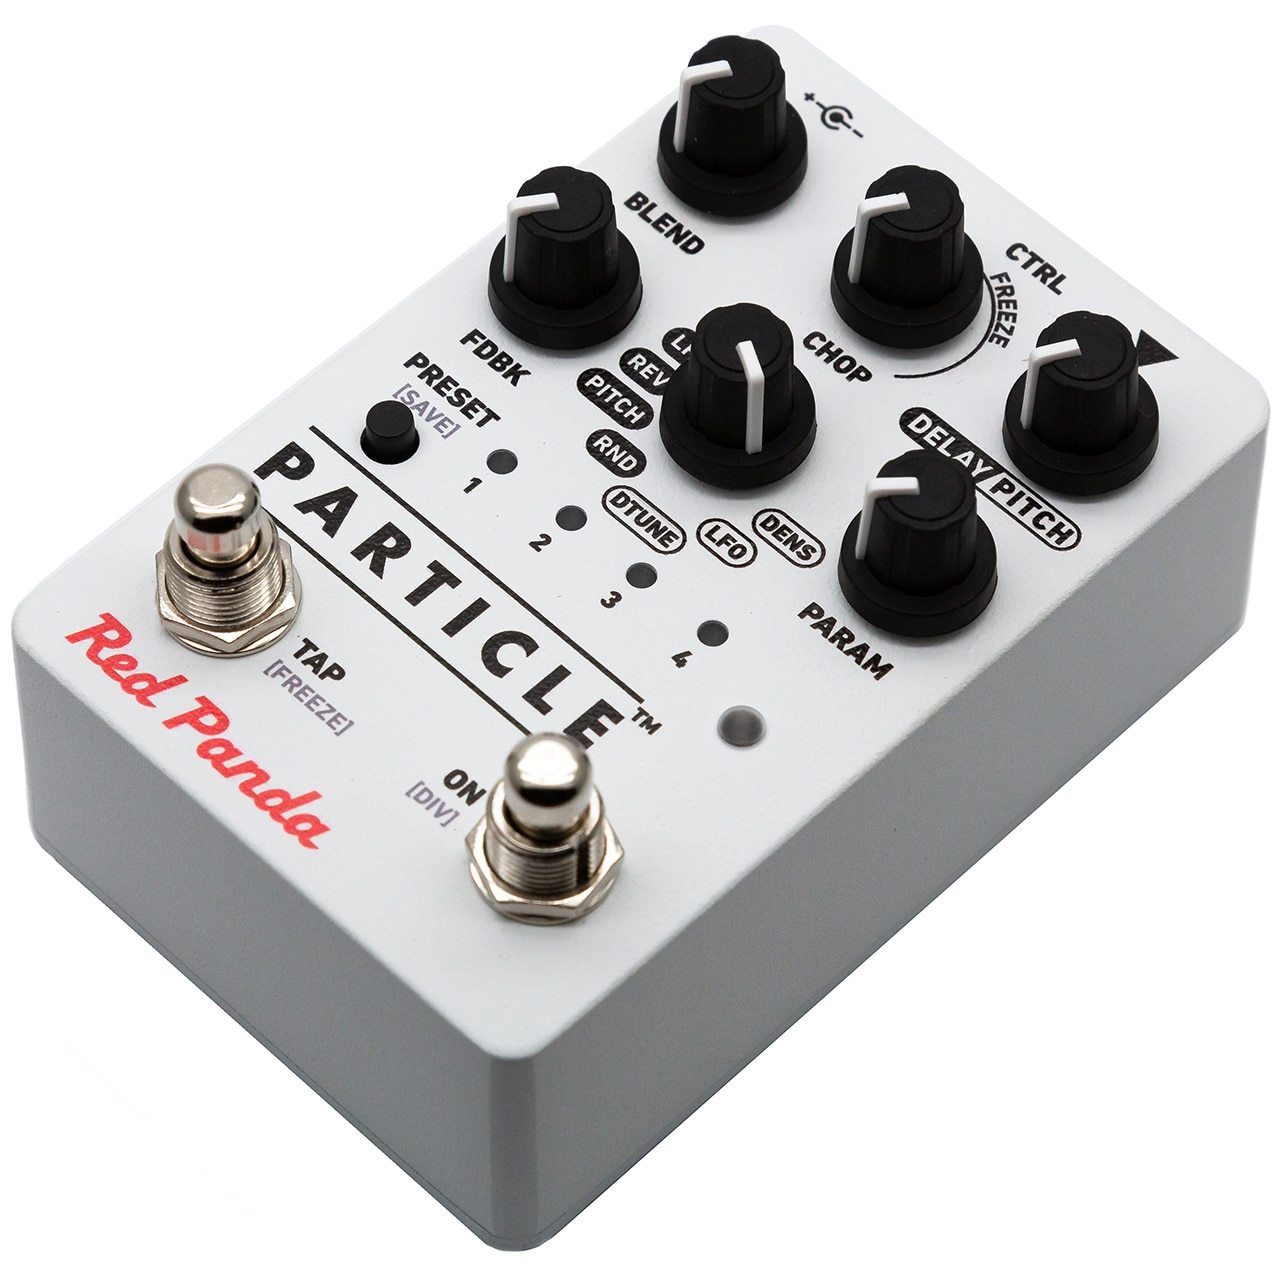 Red Panda Particle V2 - Reverb, delay & echo effect pedal - Variation 1